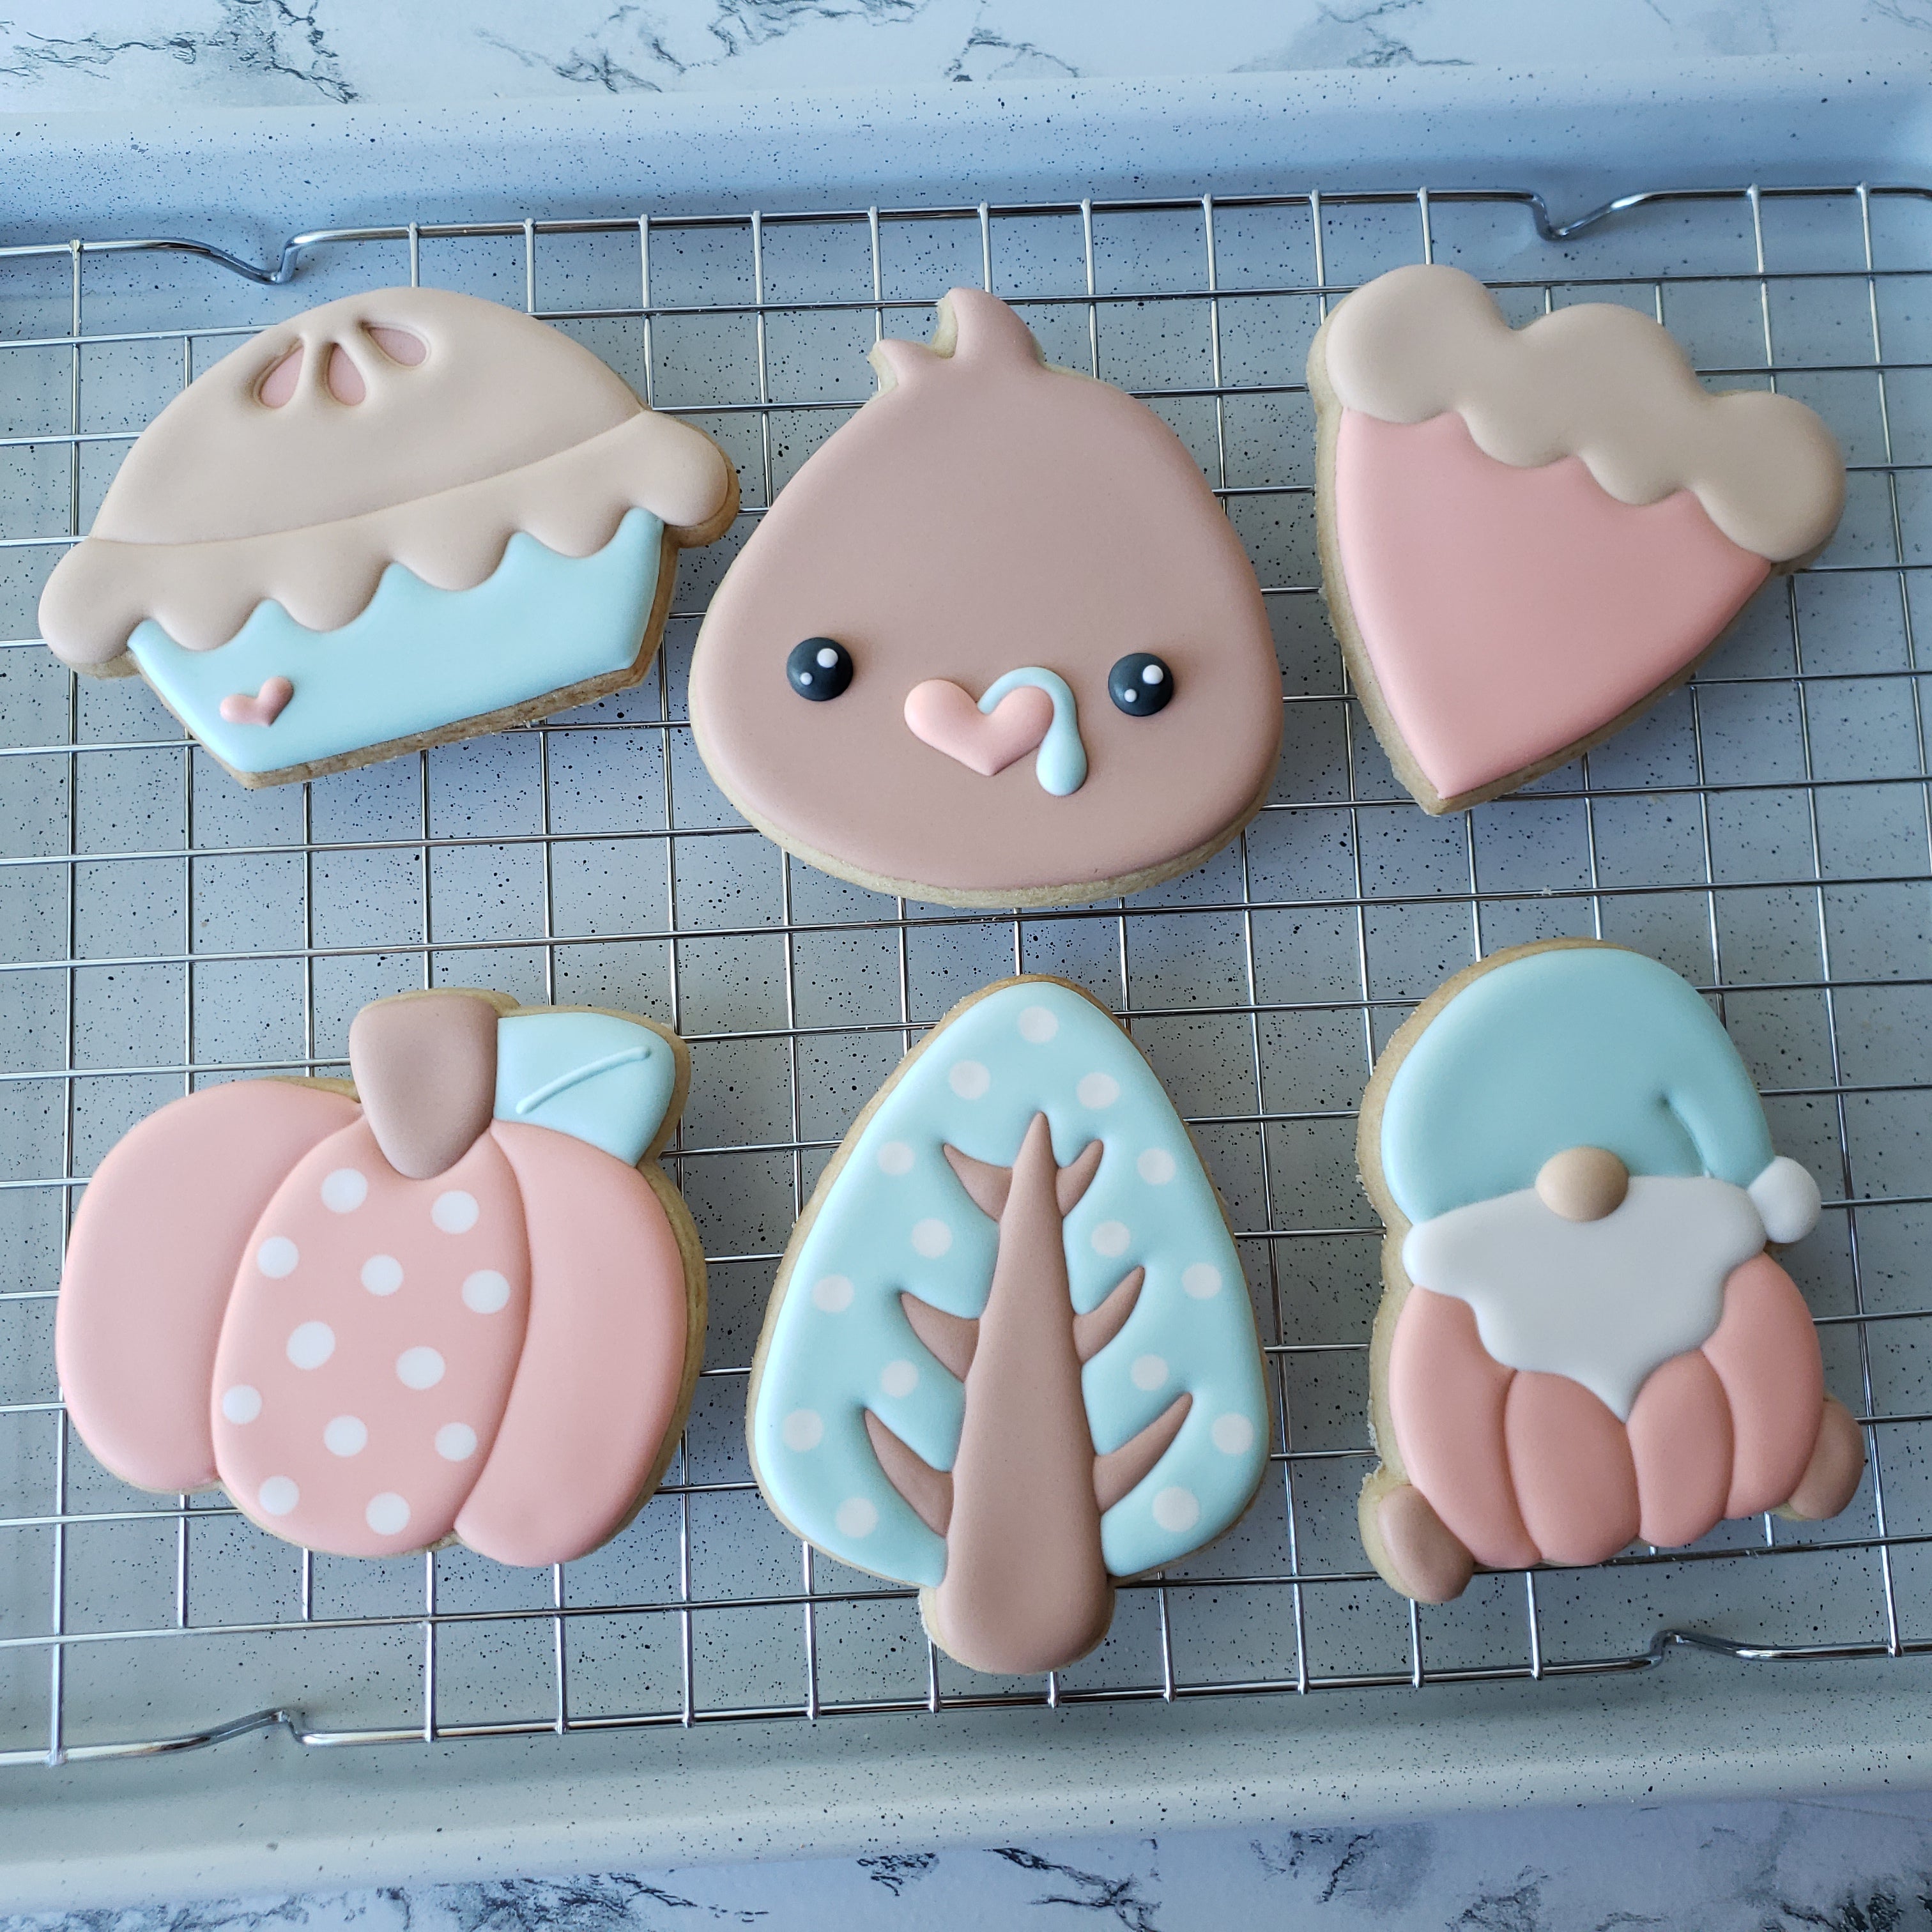 Paper Street Parlour Simply Thanksgiving Cookie Class Cookie